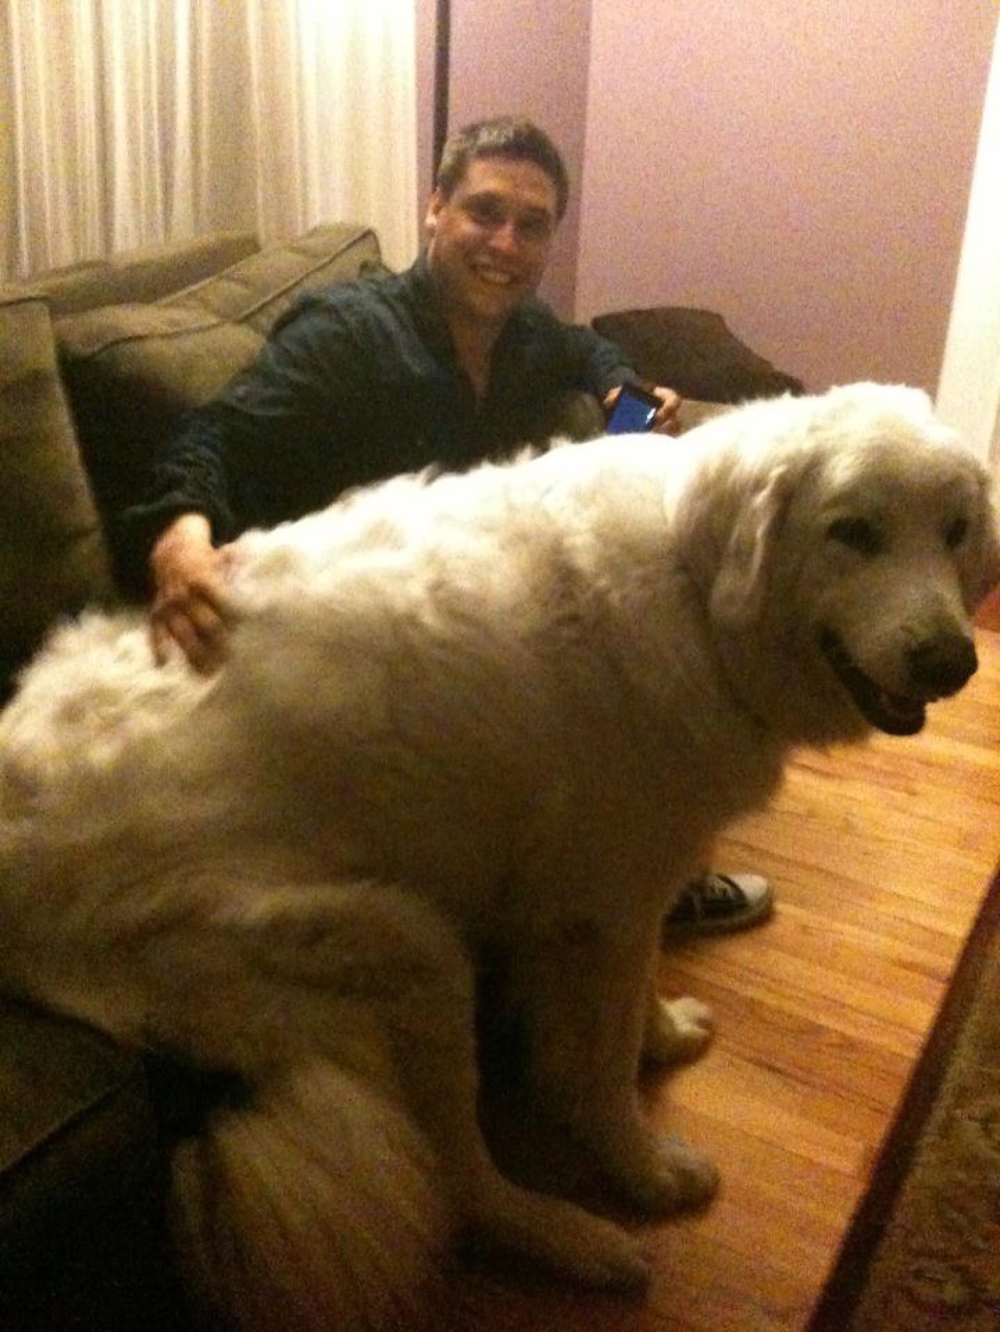 Giant dog on couch 